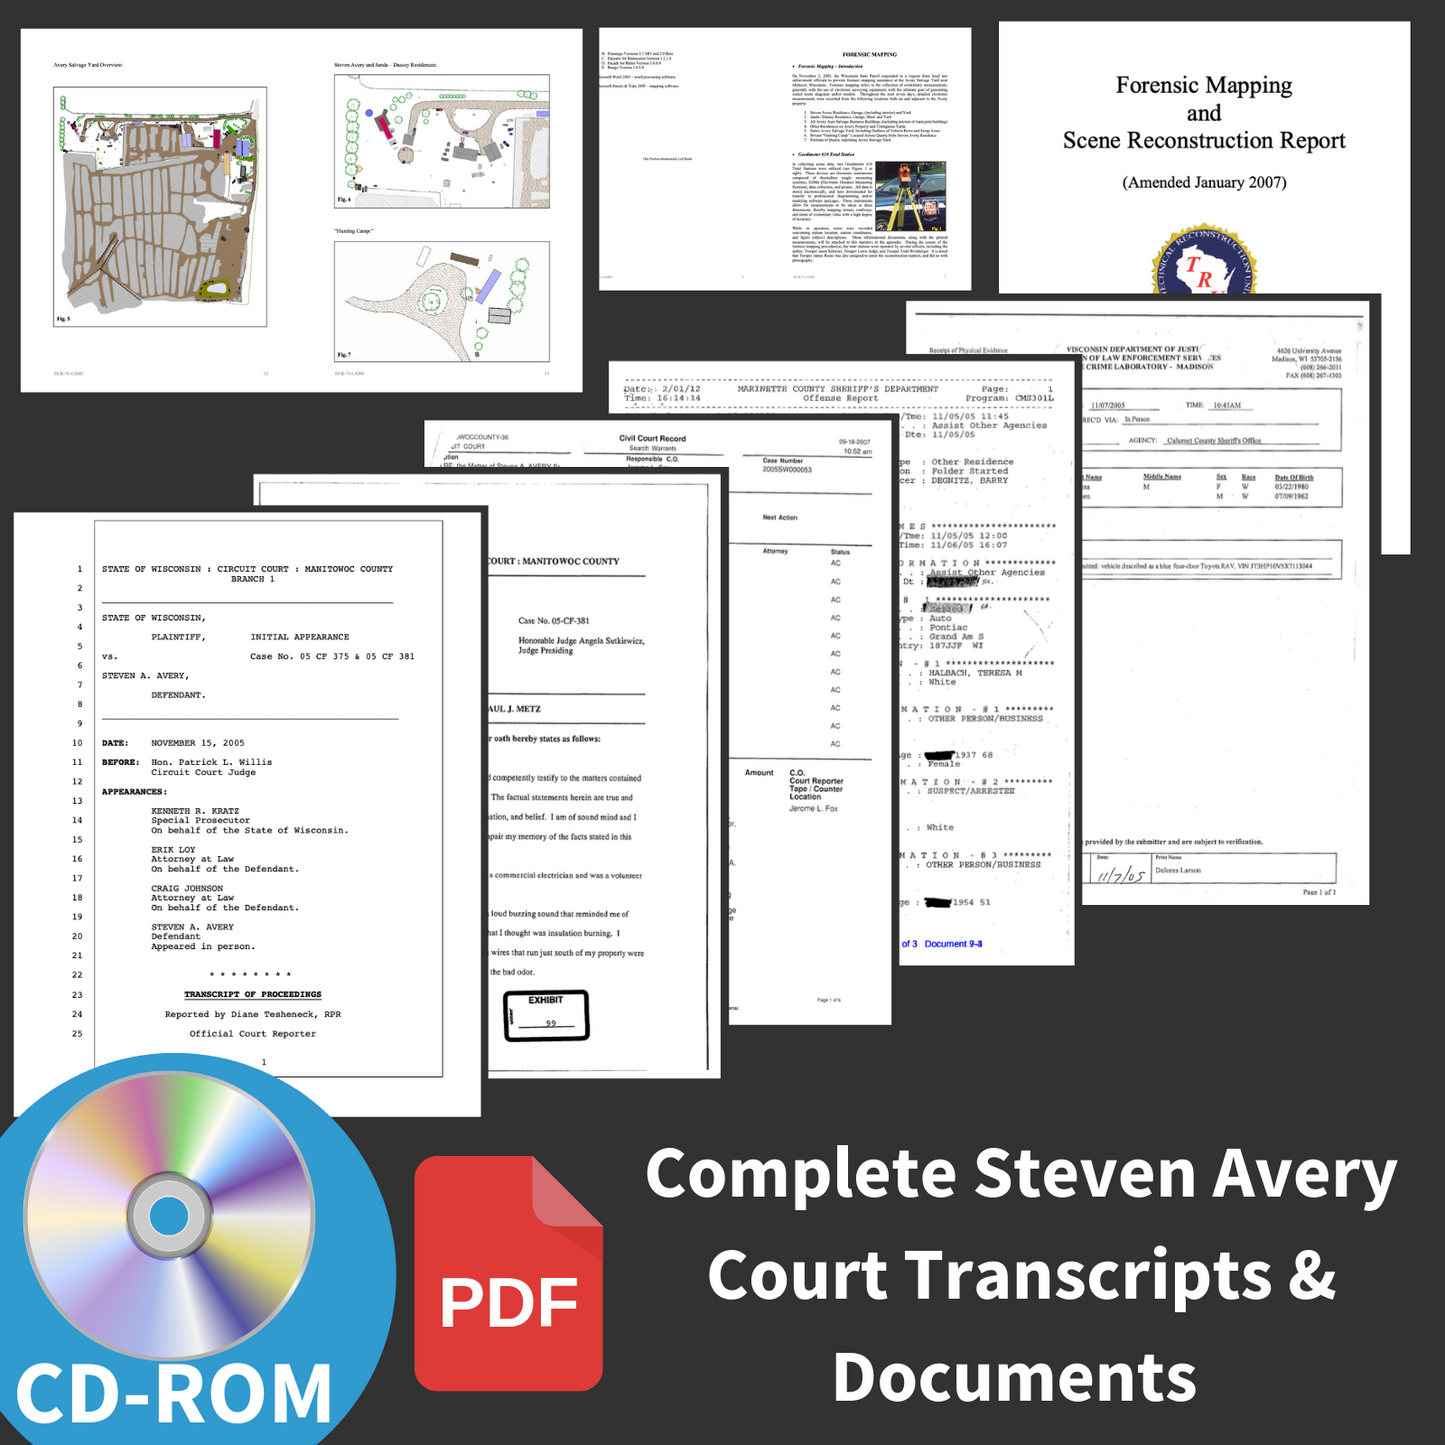 Complete Steven Avery Court Transcripts - Making a Murderer Trial eBook on CD